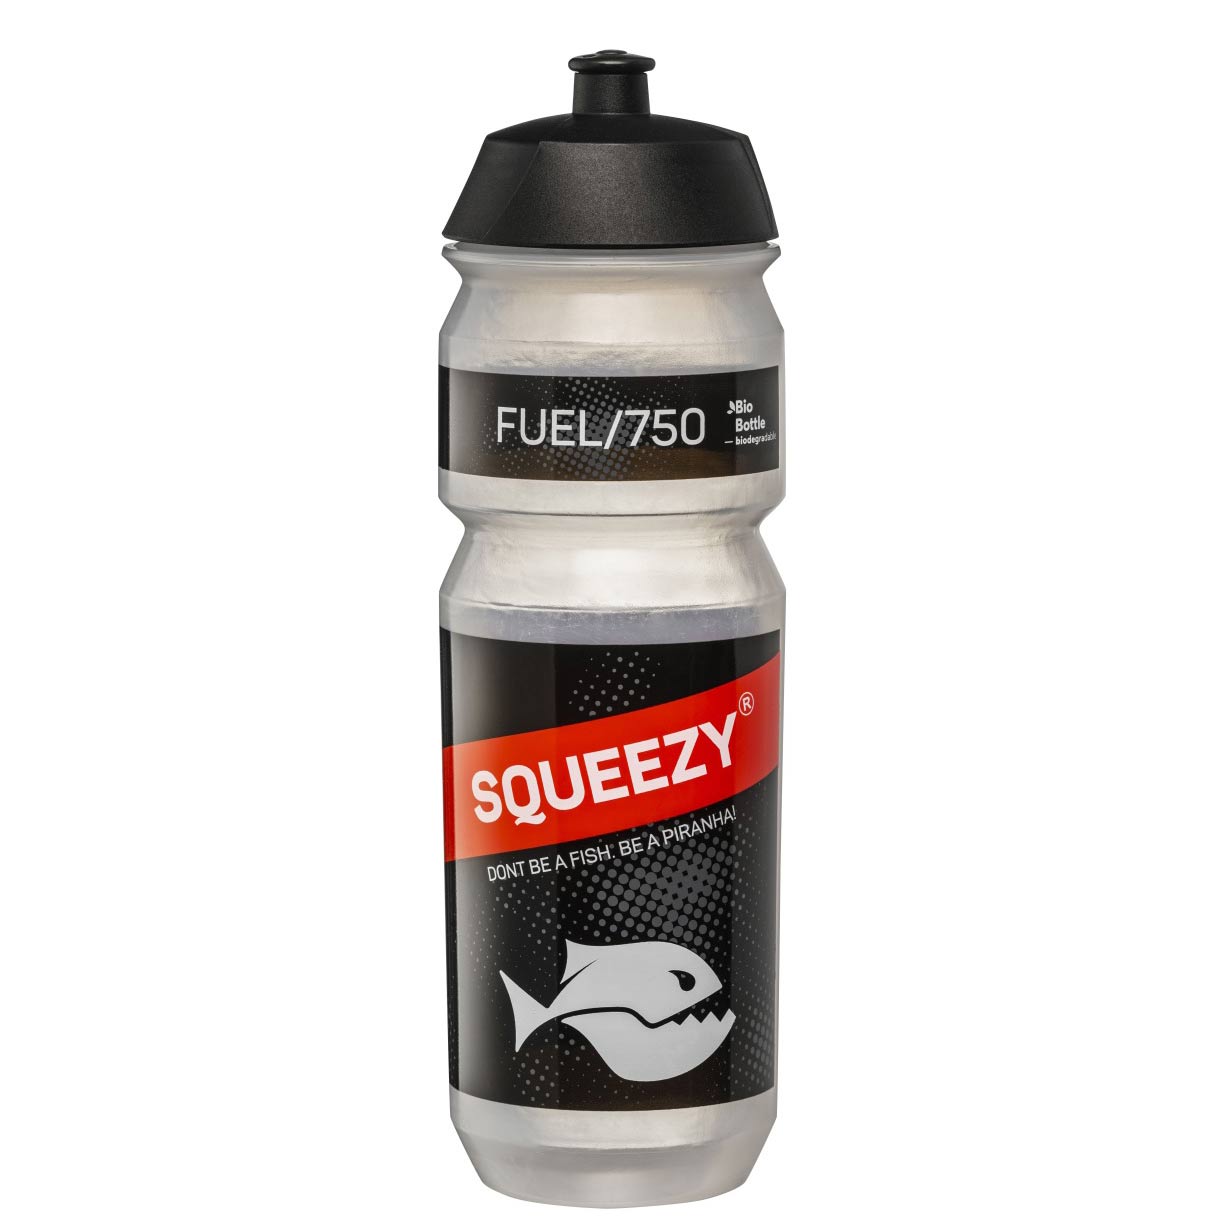 Productfoto van Squeezy Drinking Bottle 750ml - dont be a fish